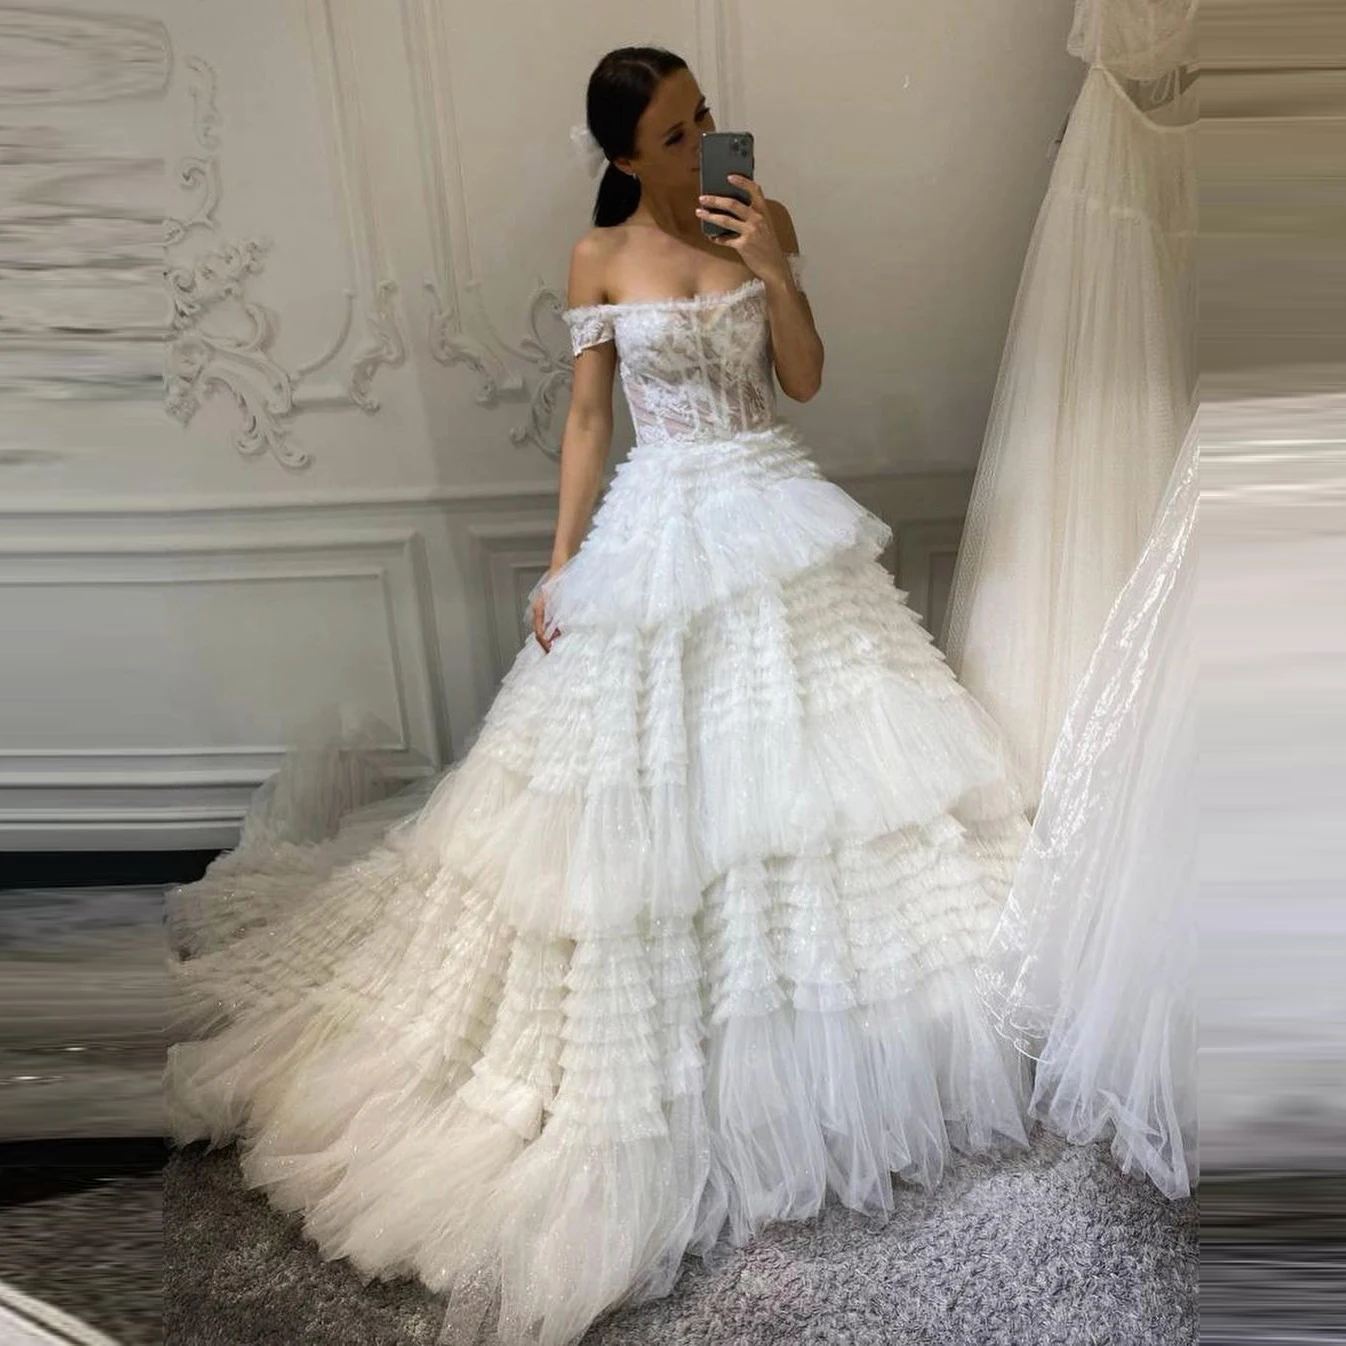 

Extra Puffy Tulle Wedding Gowns In Dubai Cap Sleeves Lace Top Tiered Ruffles Ball Gown Bridal Plus Size Wedding Gown Lace-up Bac